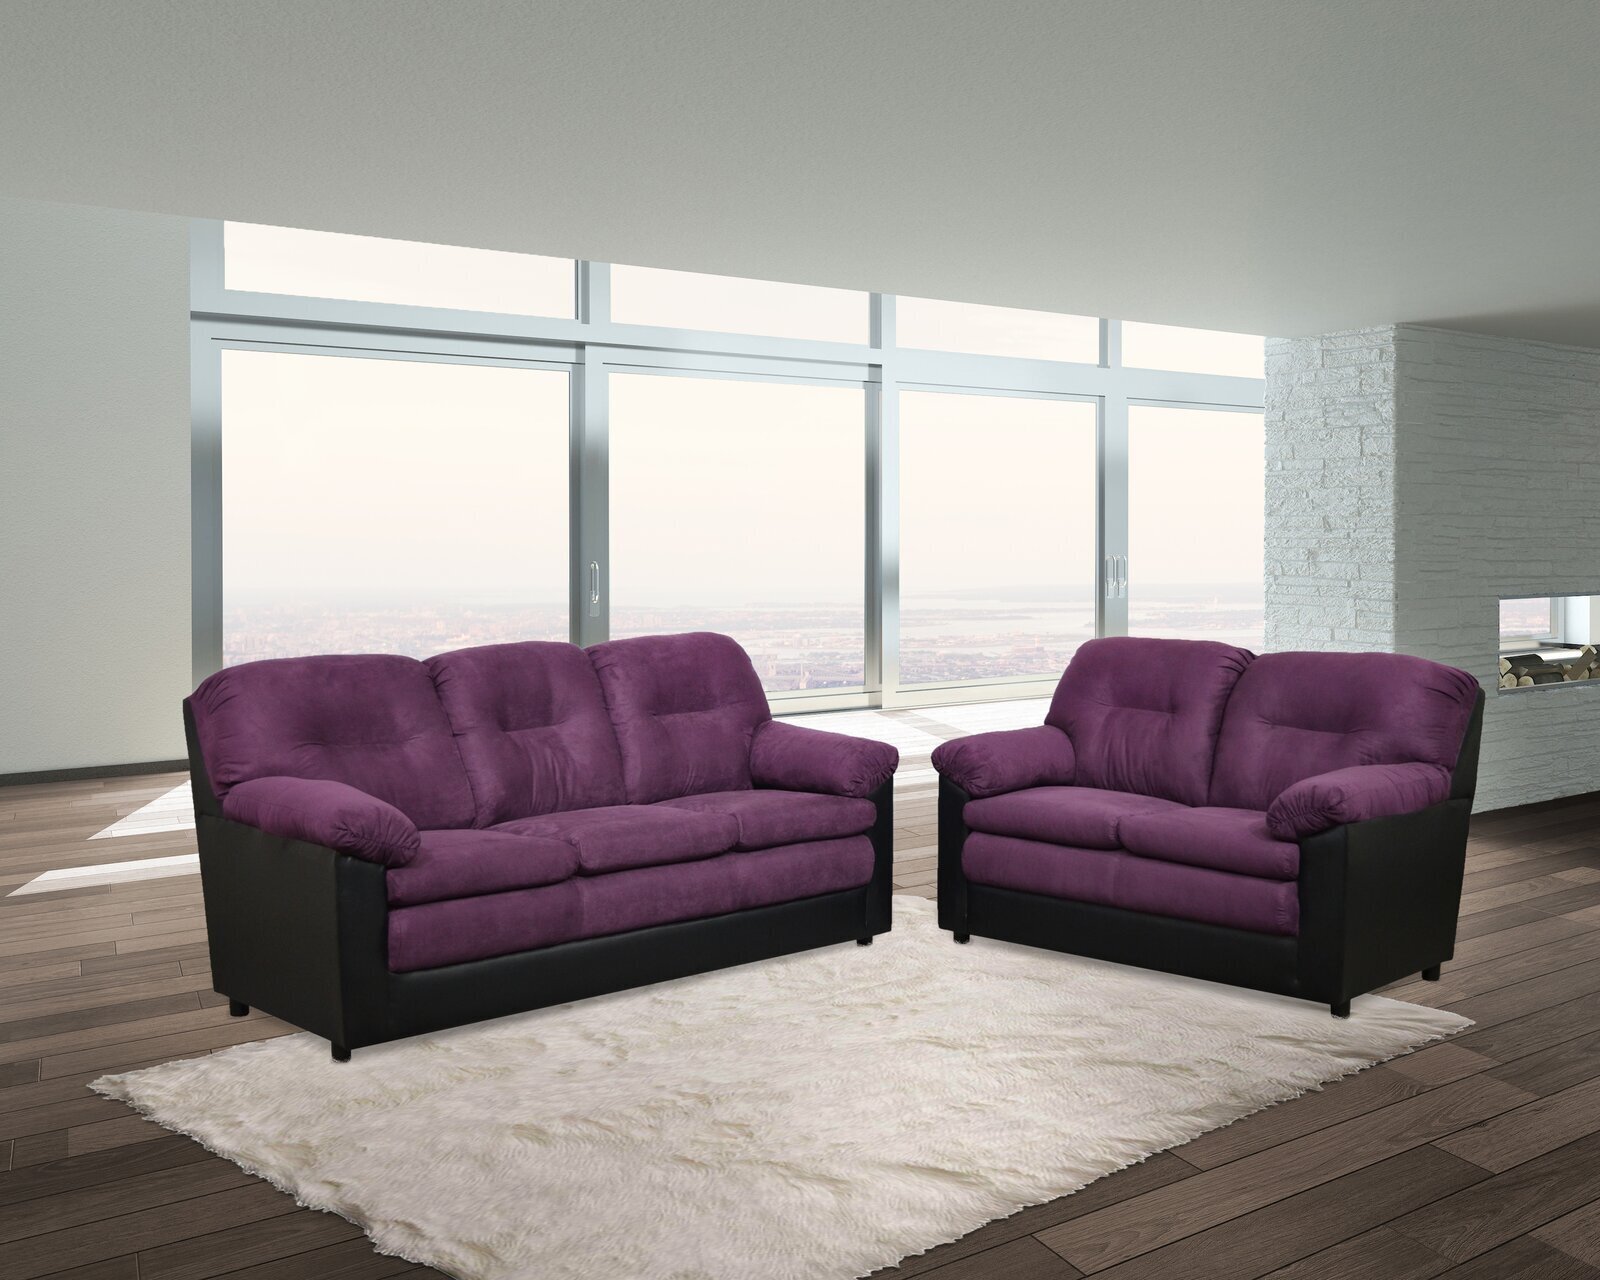 Purple living room set with two sofas